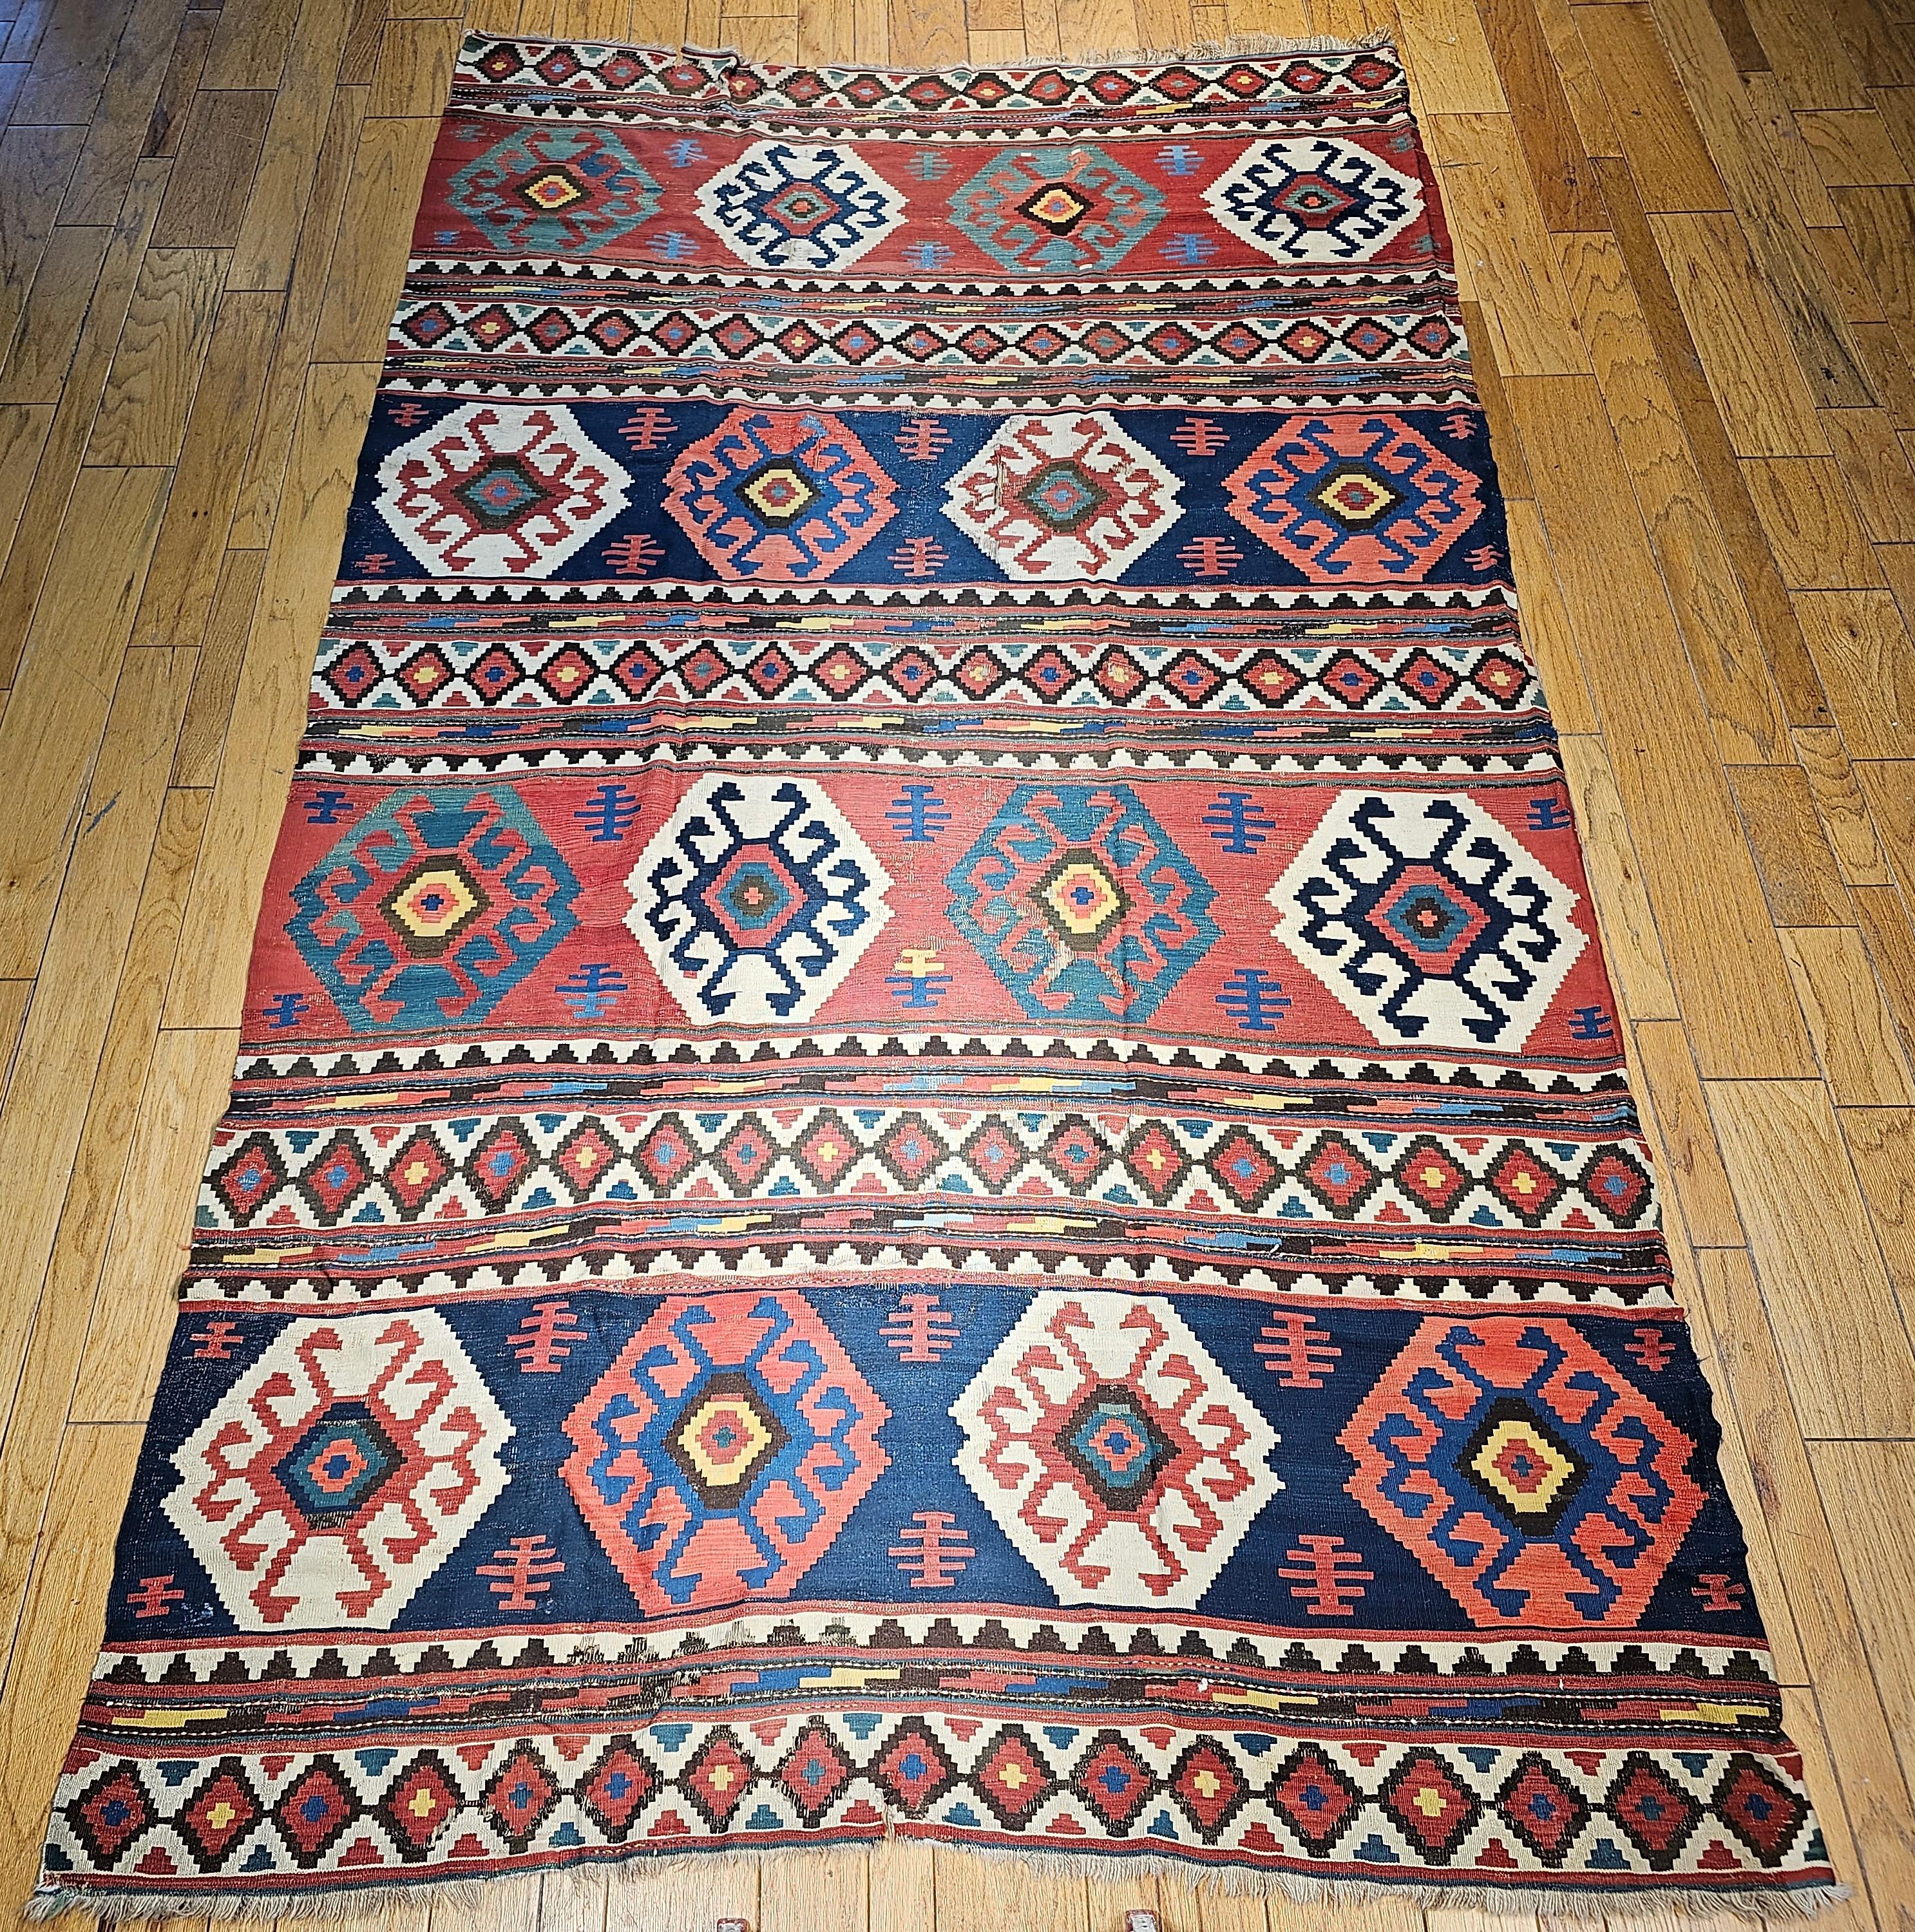 19th Century Caucasian Kazak room size kilim in blue, green, pink, ivory, navy, and yellow.   Since Kilims are tapestry type flatweaves (no pile), finding a room size one that is over 125 years in a good condition is extremely rare. This Caucasian